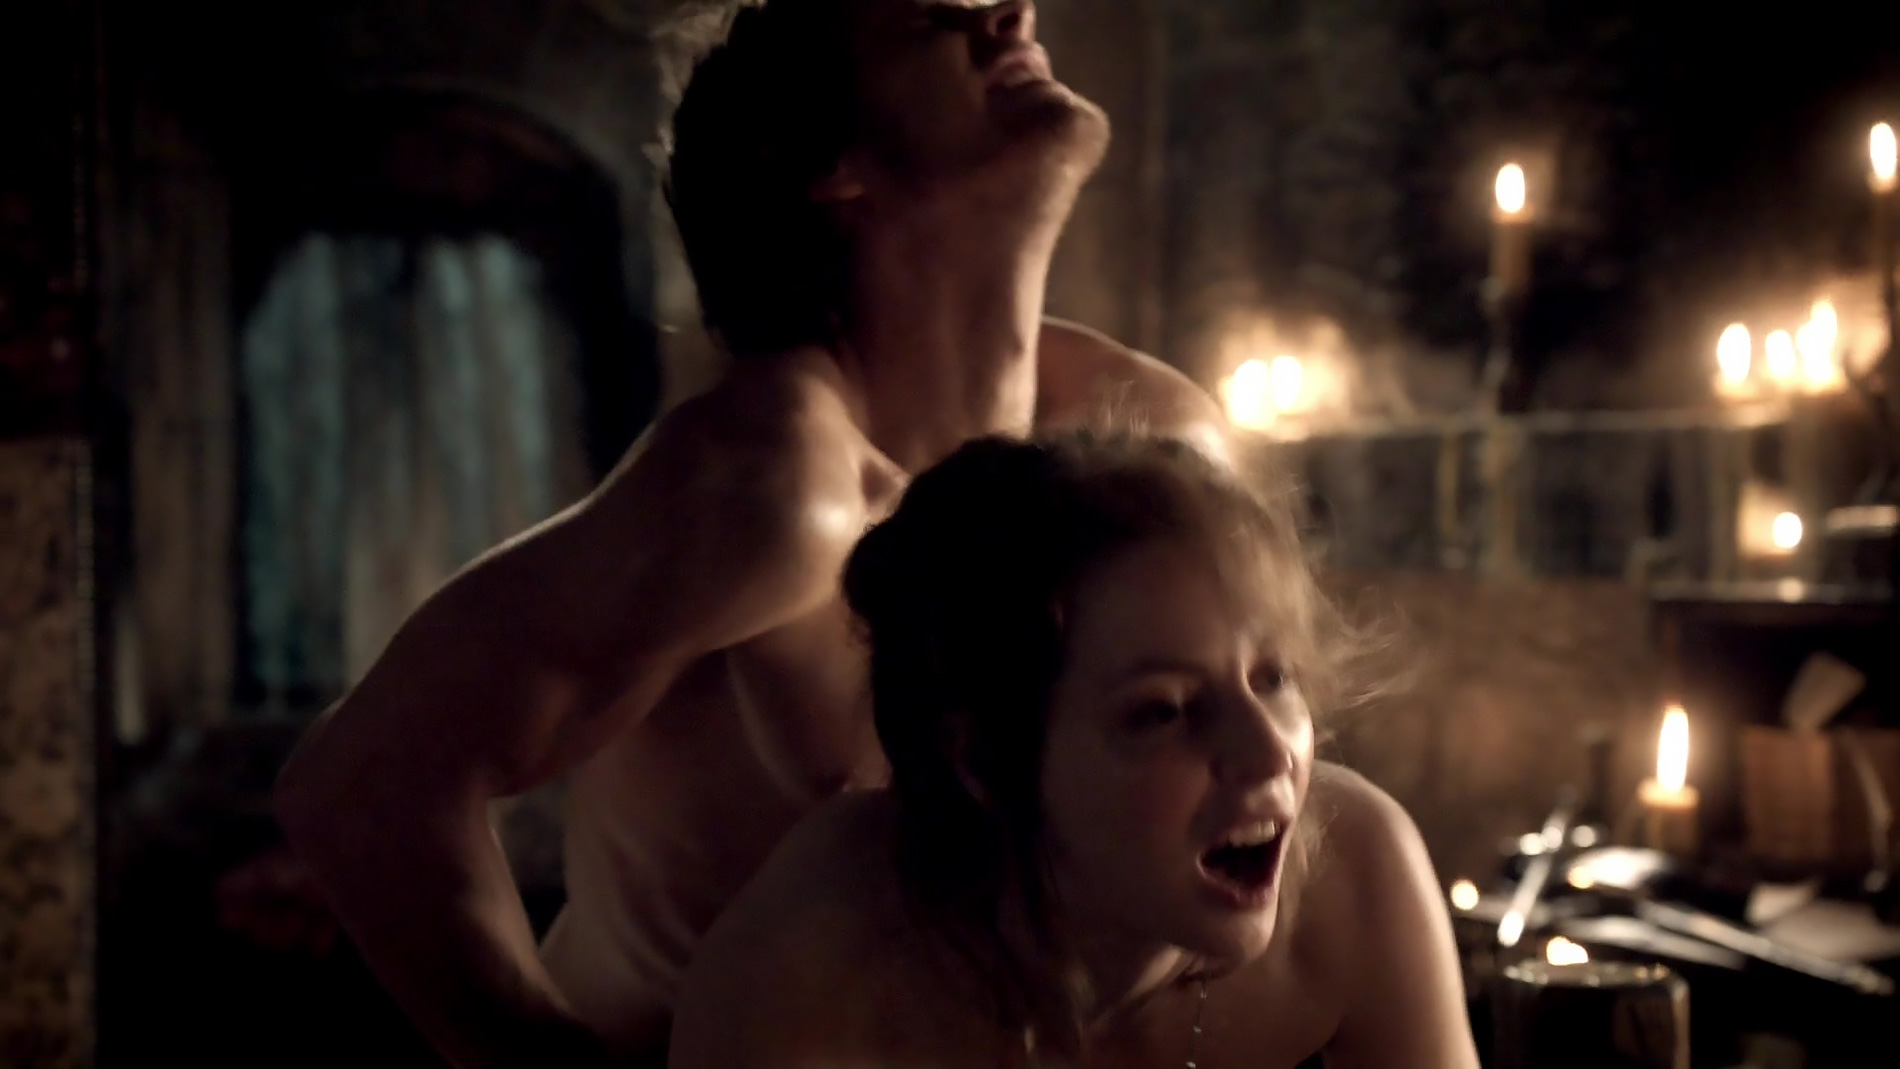 In this sex scene from Game Of Thrones we see Esme Bianco having sex with T...